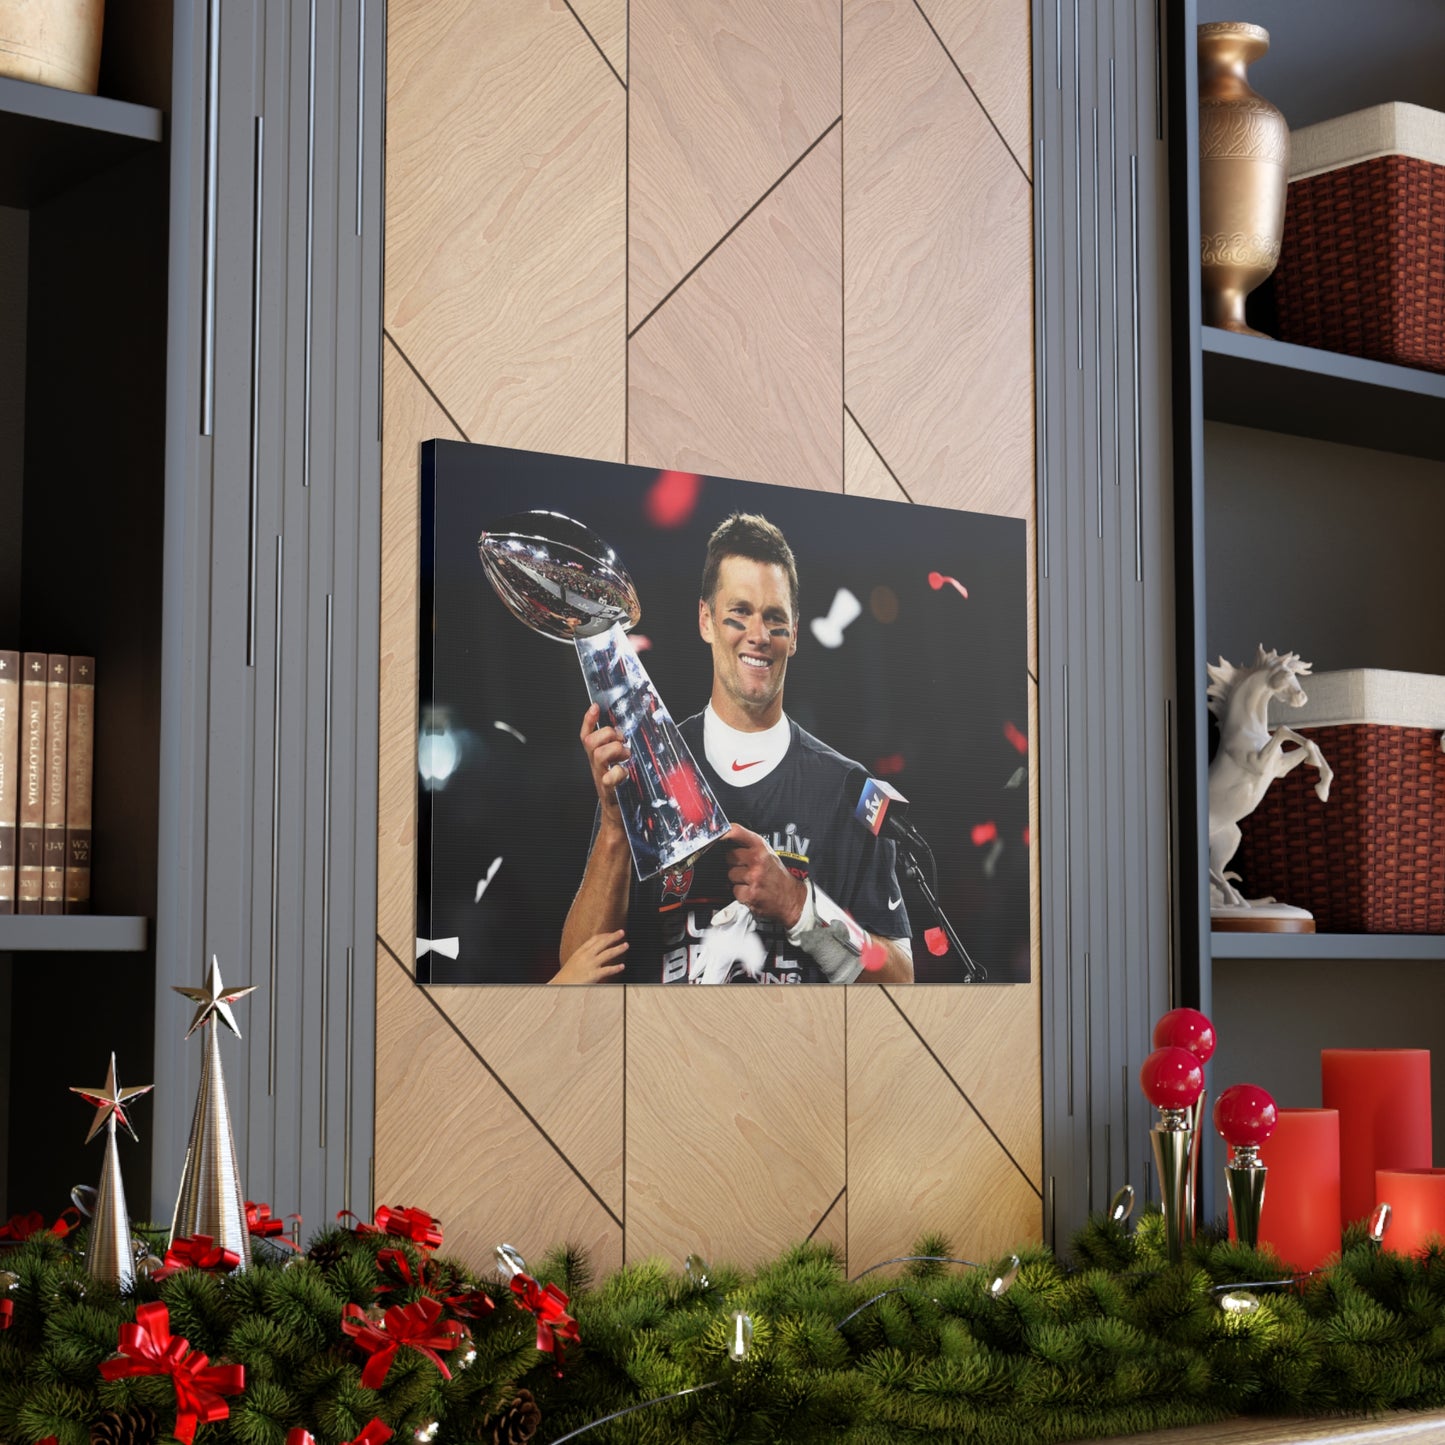 Close Up Image Of Tom Brady Holding The Vince Lombardi Trophy With The Tampa Bay Buccaneers After Winning Super Bowl Canvas Wall Art